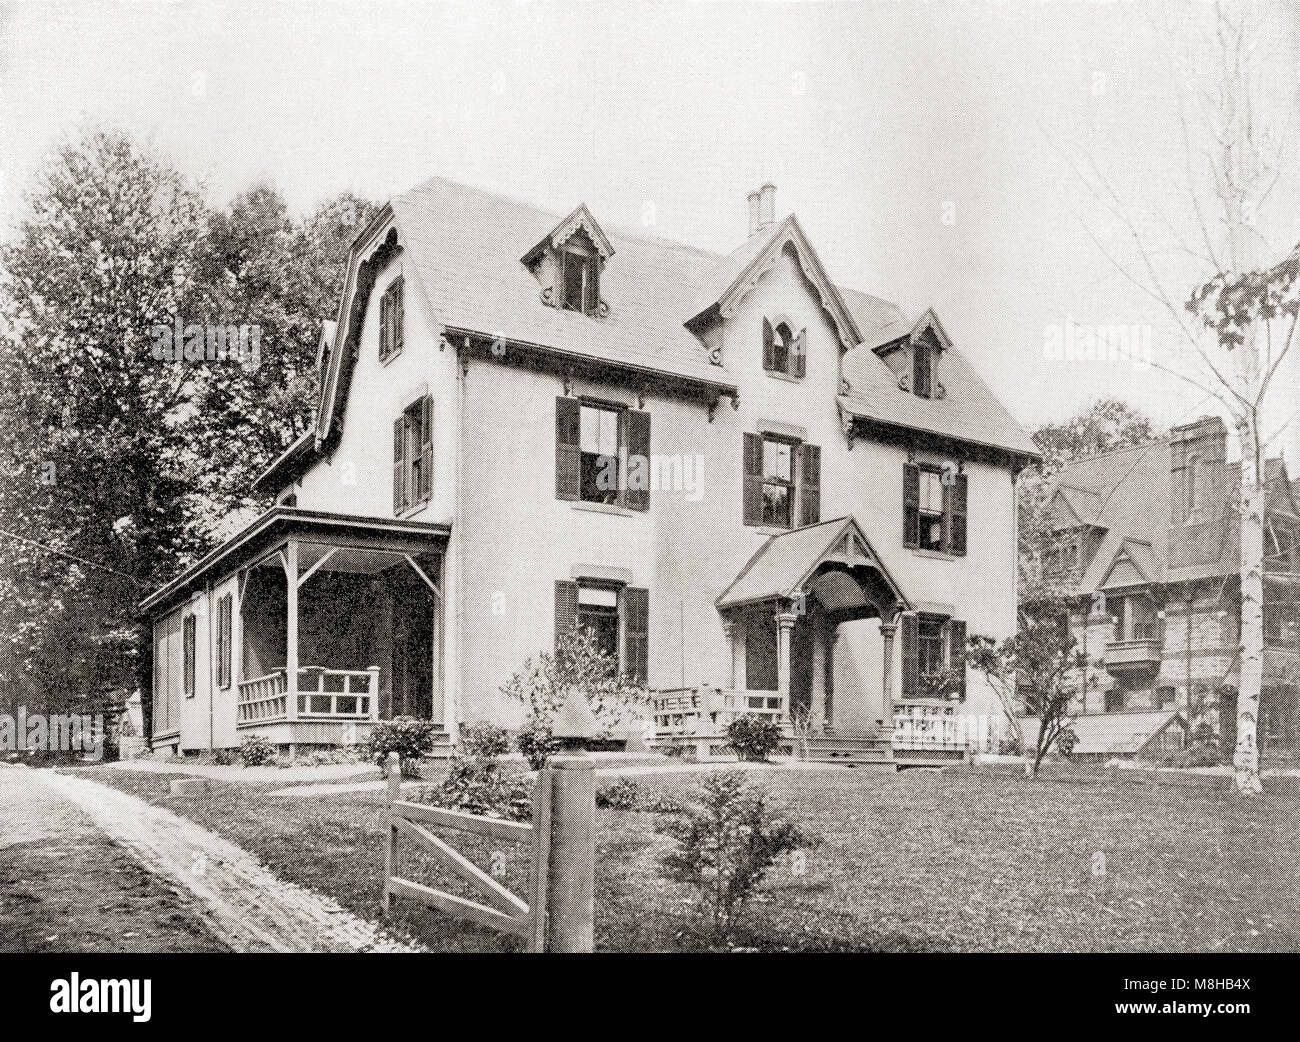 The house of Harriet Beecher Stow, Hartford, Connecticut, America.  Harriet Elisabeth Beecher Stowe, 1811 – 1896.  American abolitionist and author.  From The International Library of Famous Literature, published c. 1900. Stock Photo